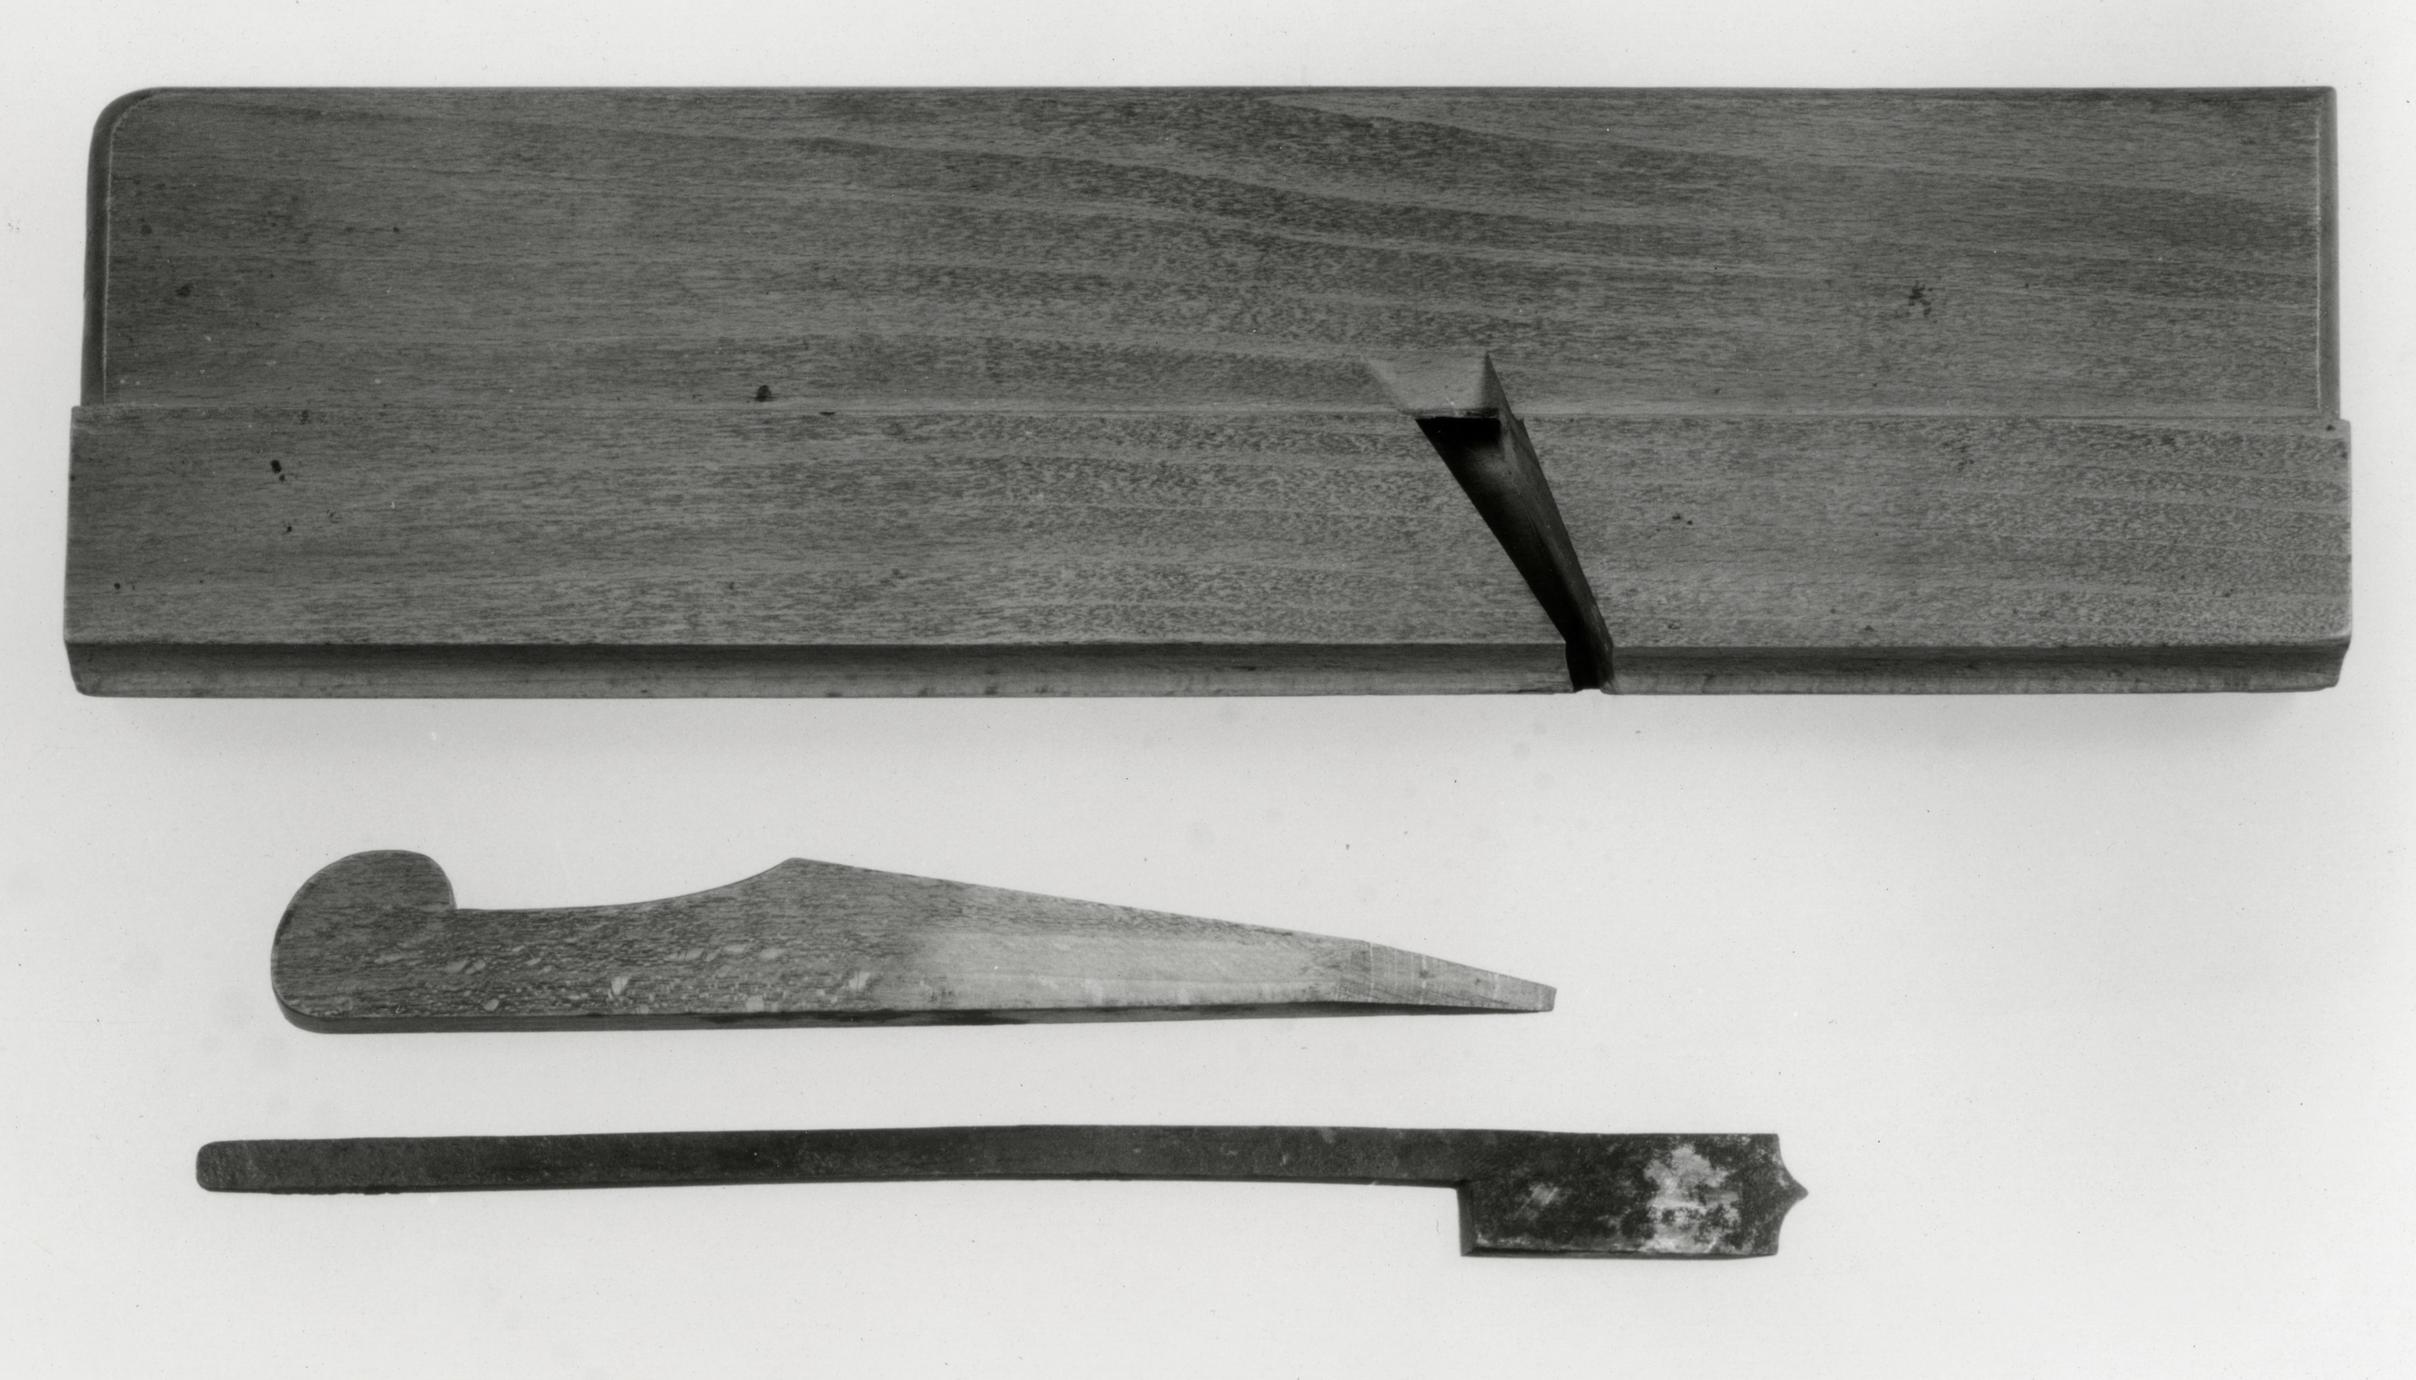 Black and white photograph of a double ovolo or quarter-round plane.